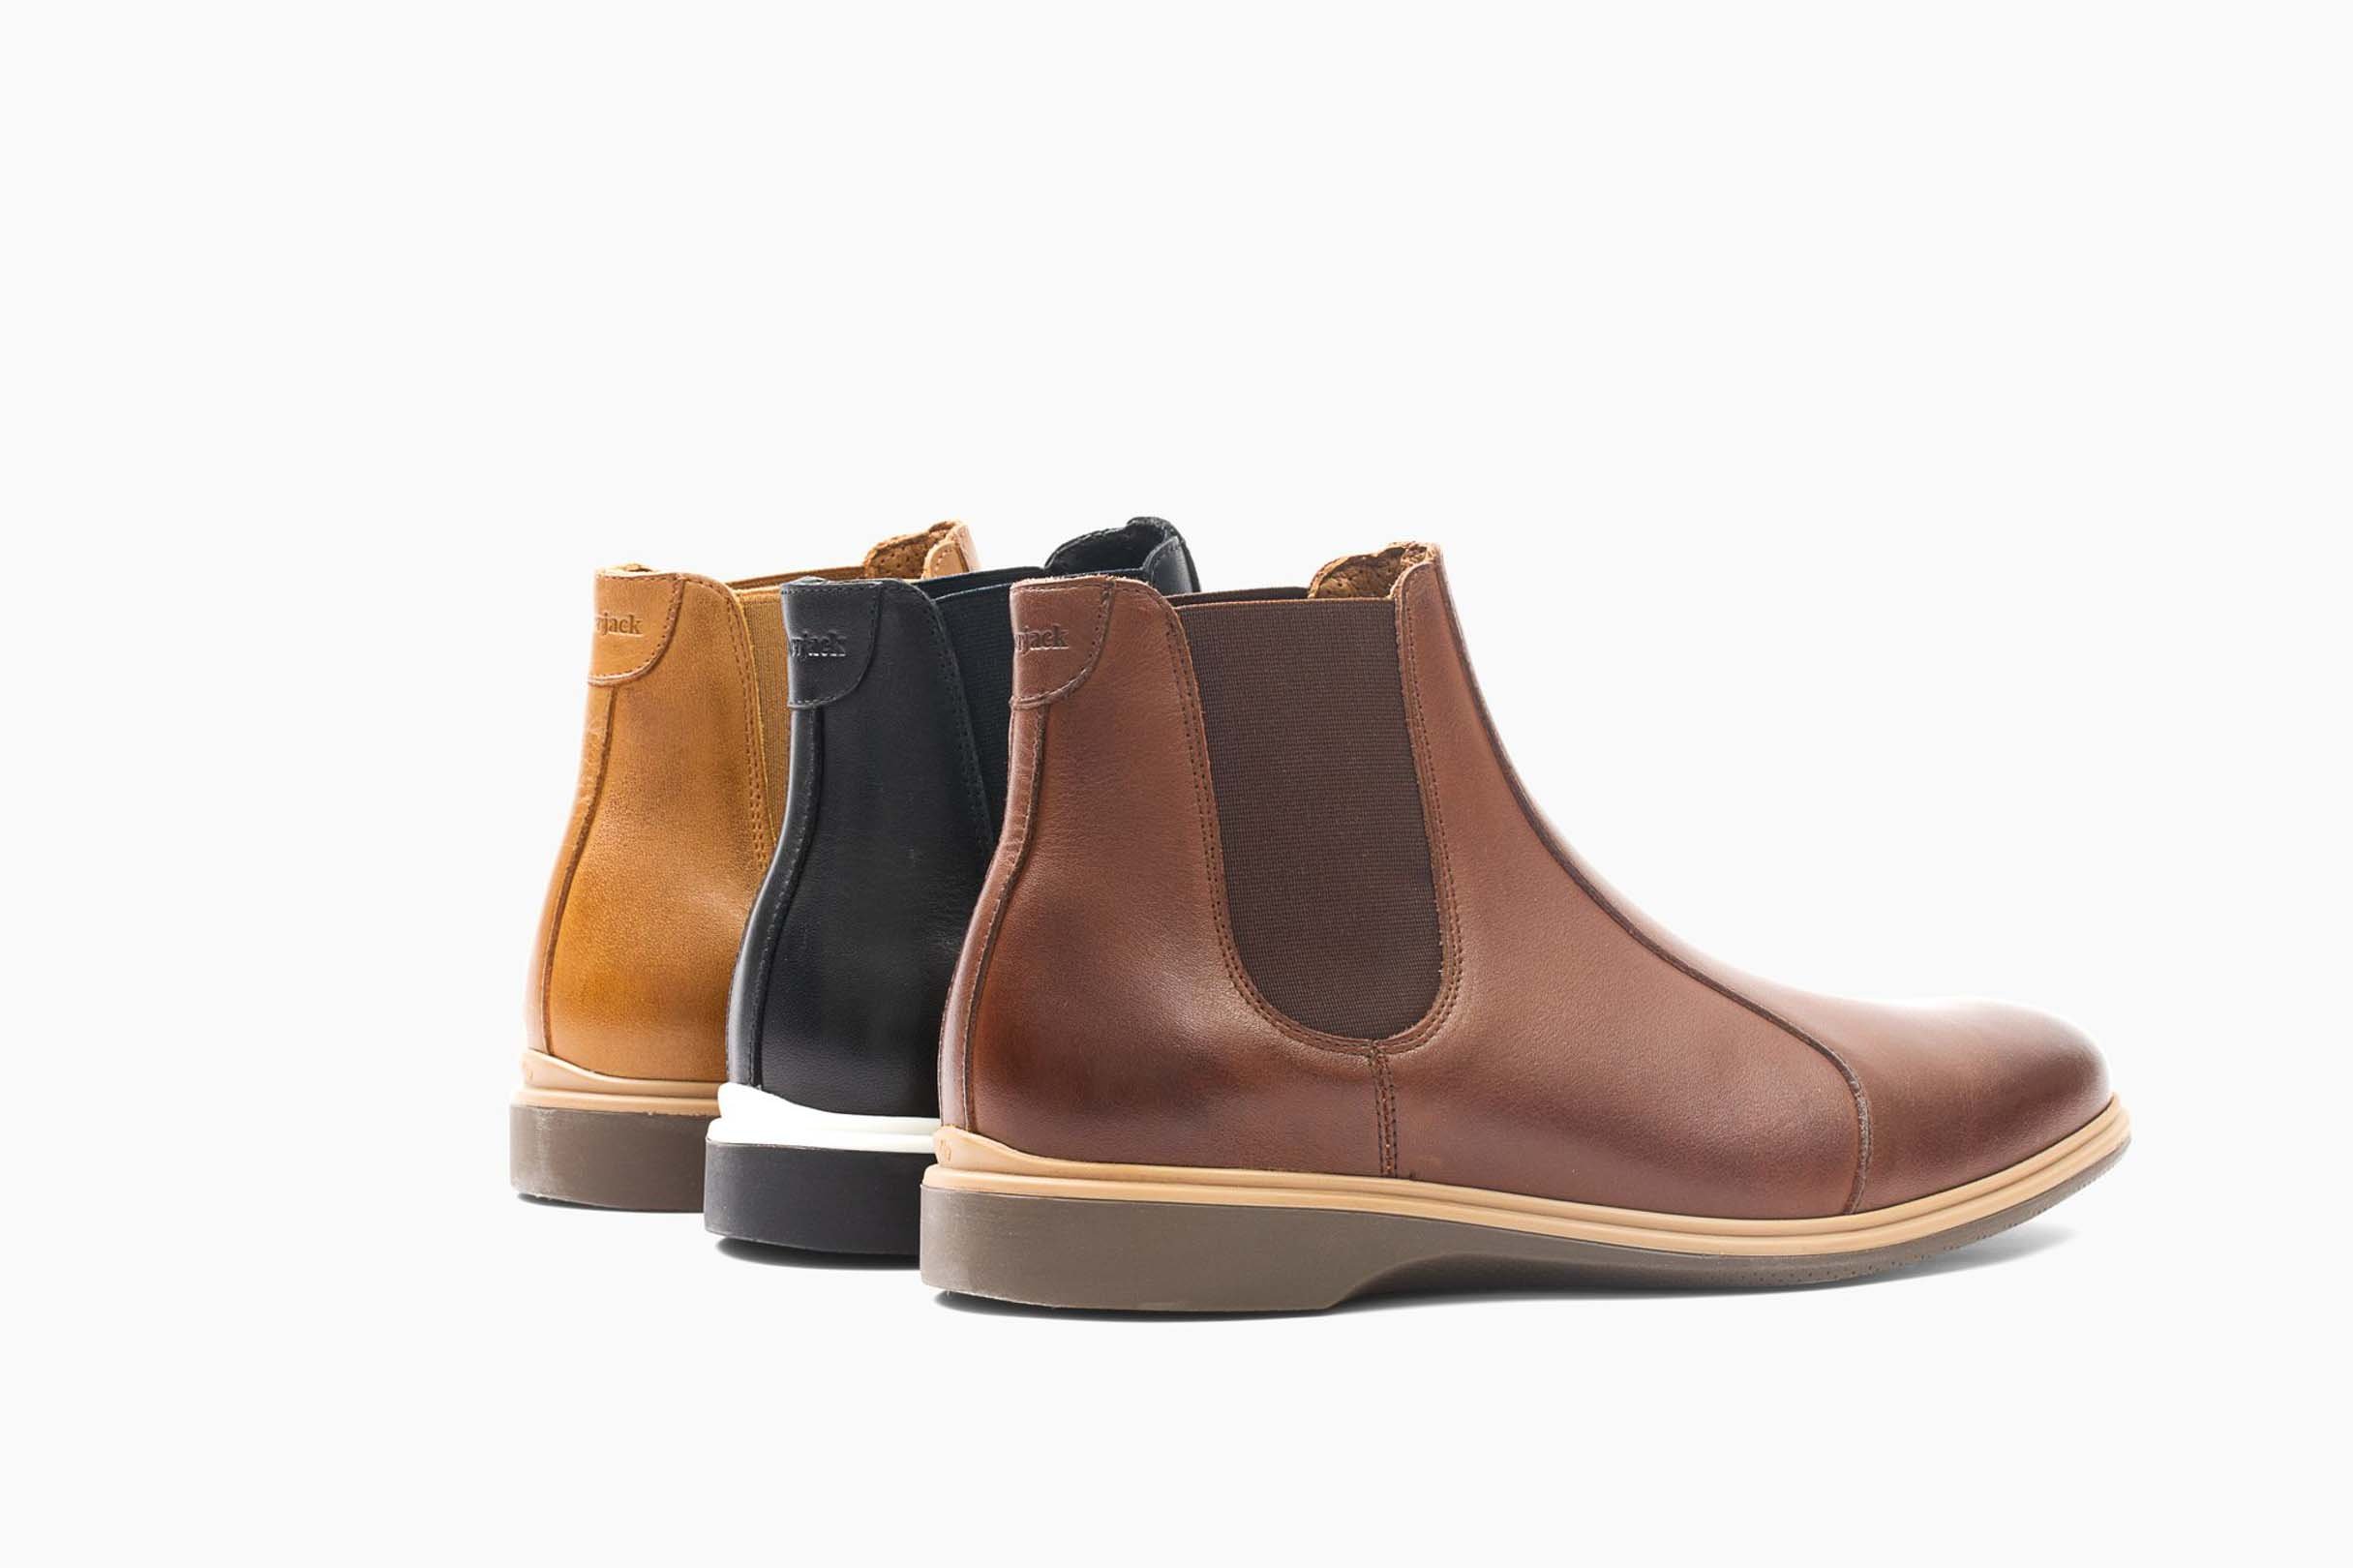 amberjack chelsea boot e-comm photography by product photographer jeremy lee